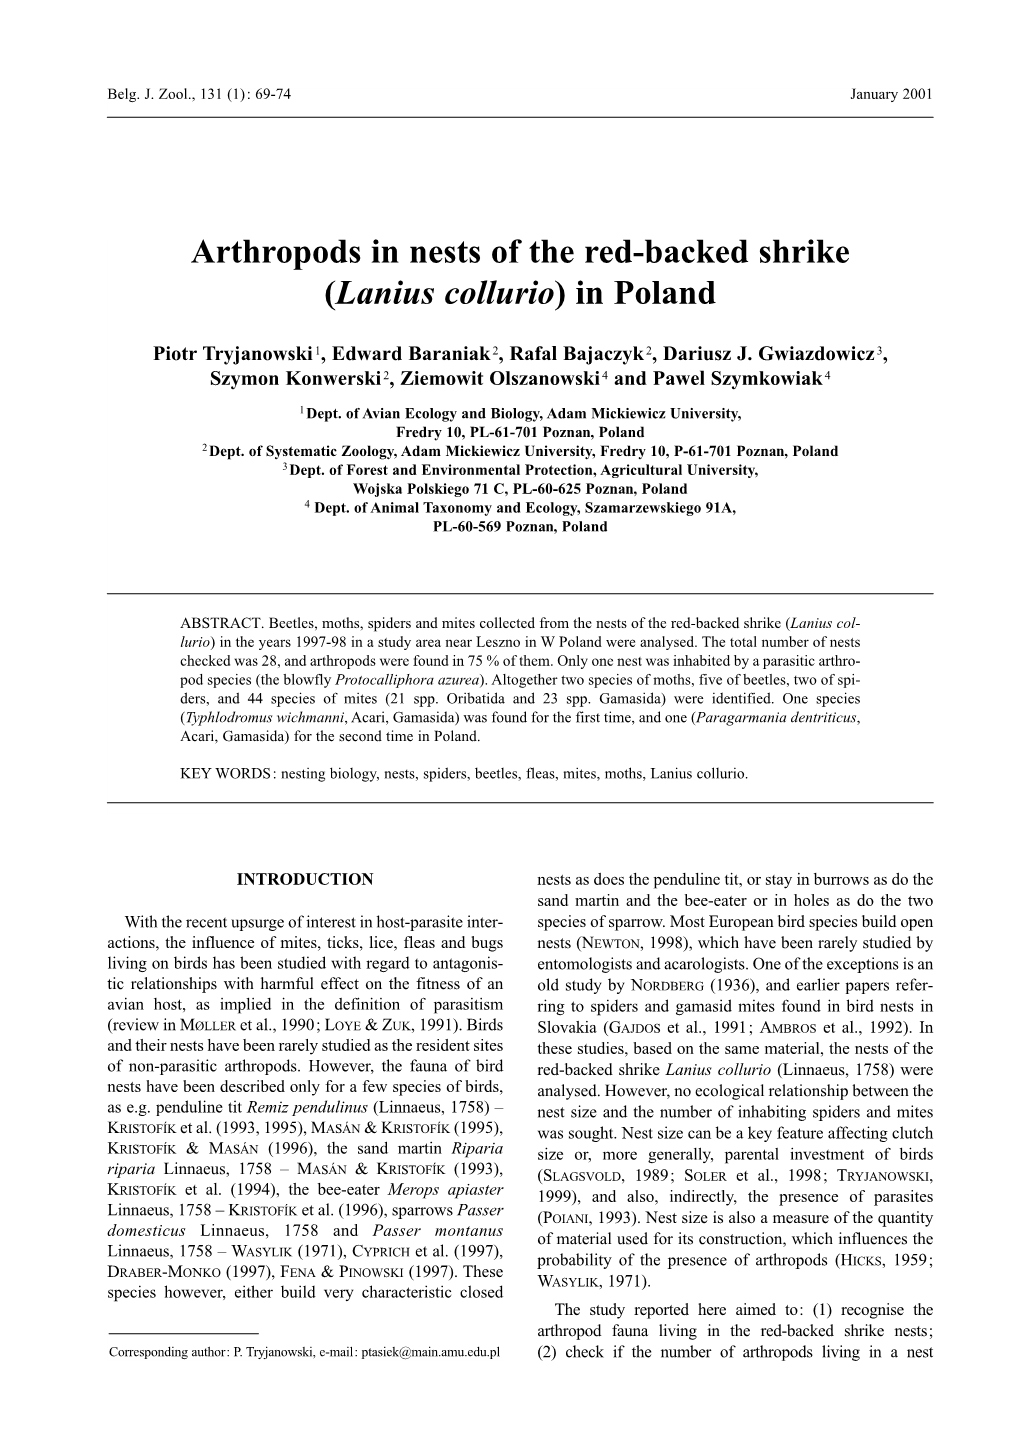 Arthropods in Nests of the Red-Backed Shrike (Lanius Collurio) in Poland